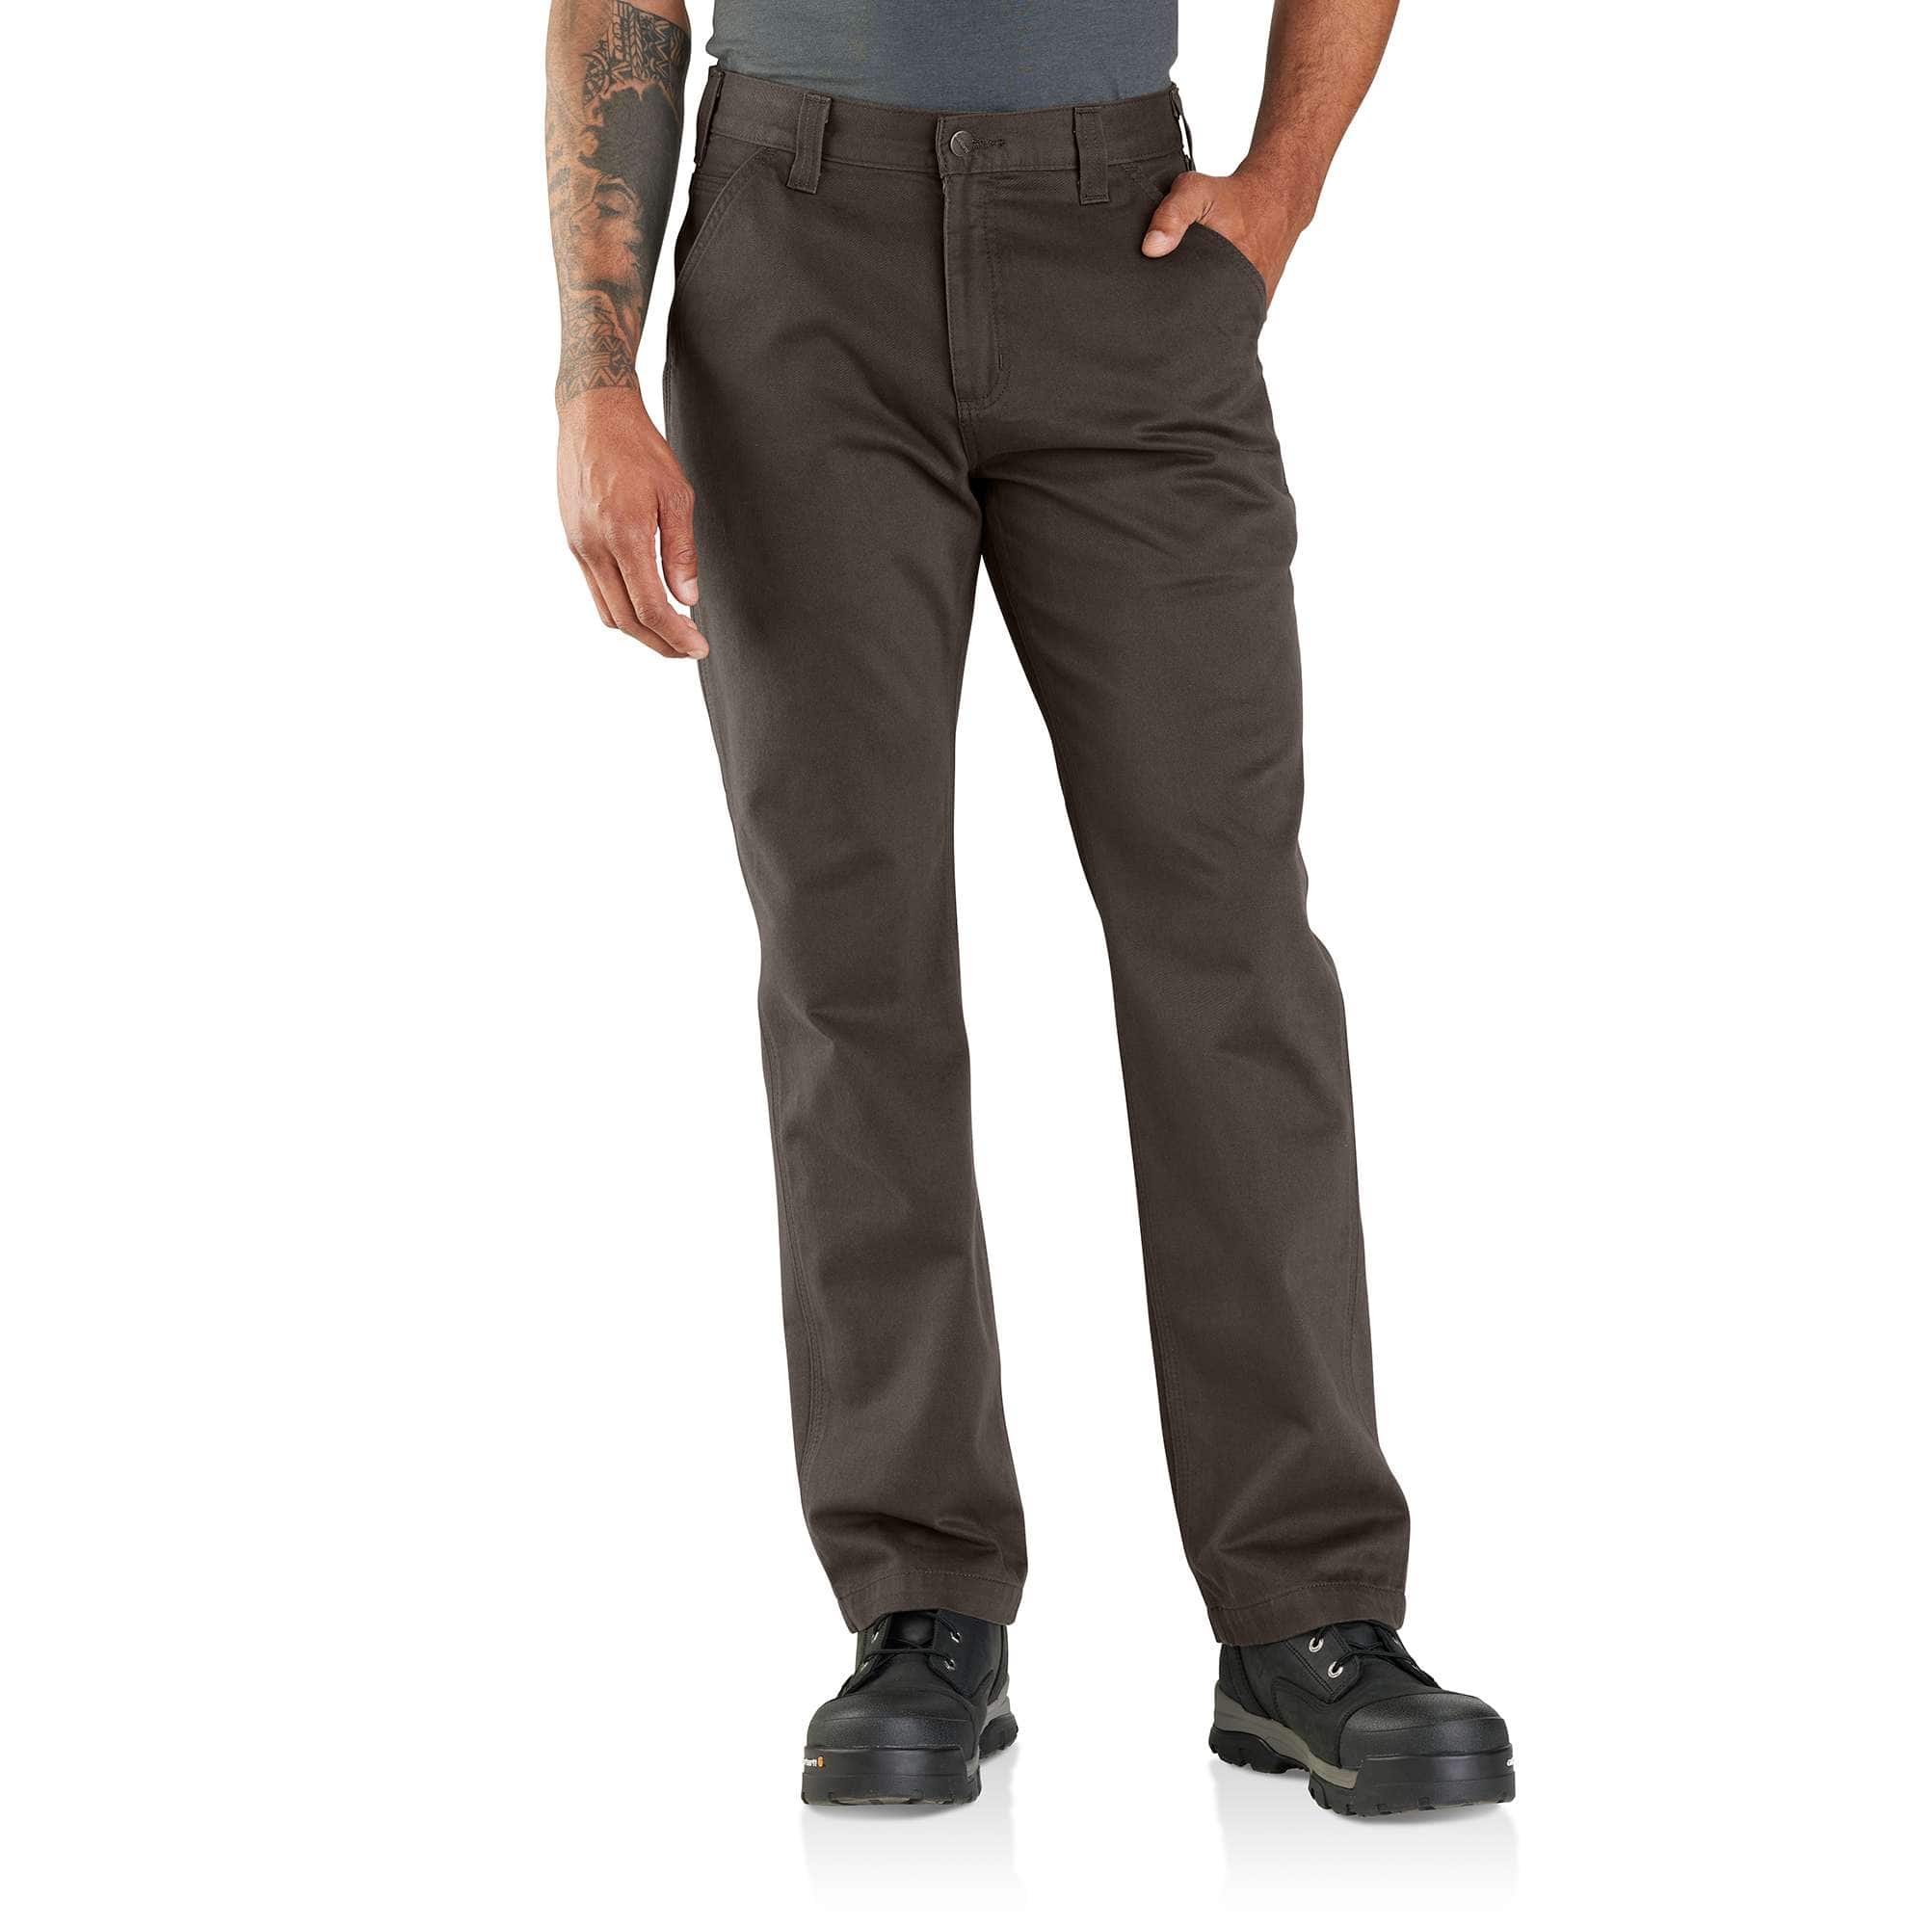 CARHARTT WORK PANTS - clothing & accessories - by owner - apparel